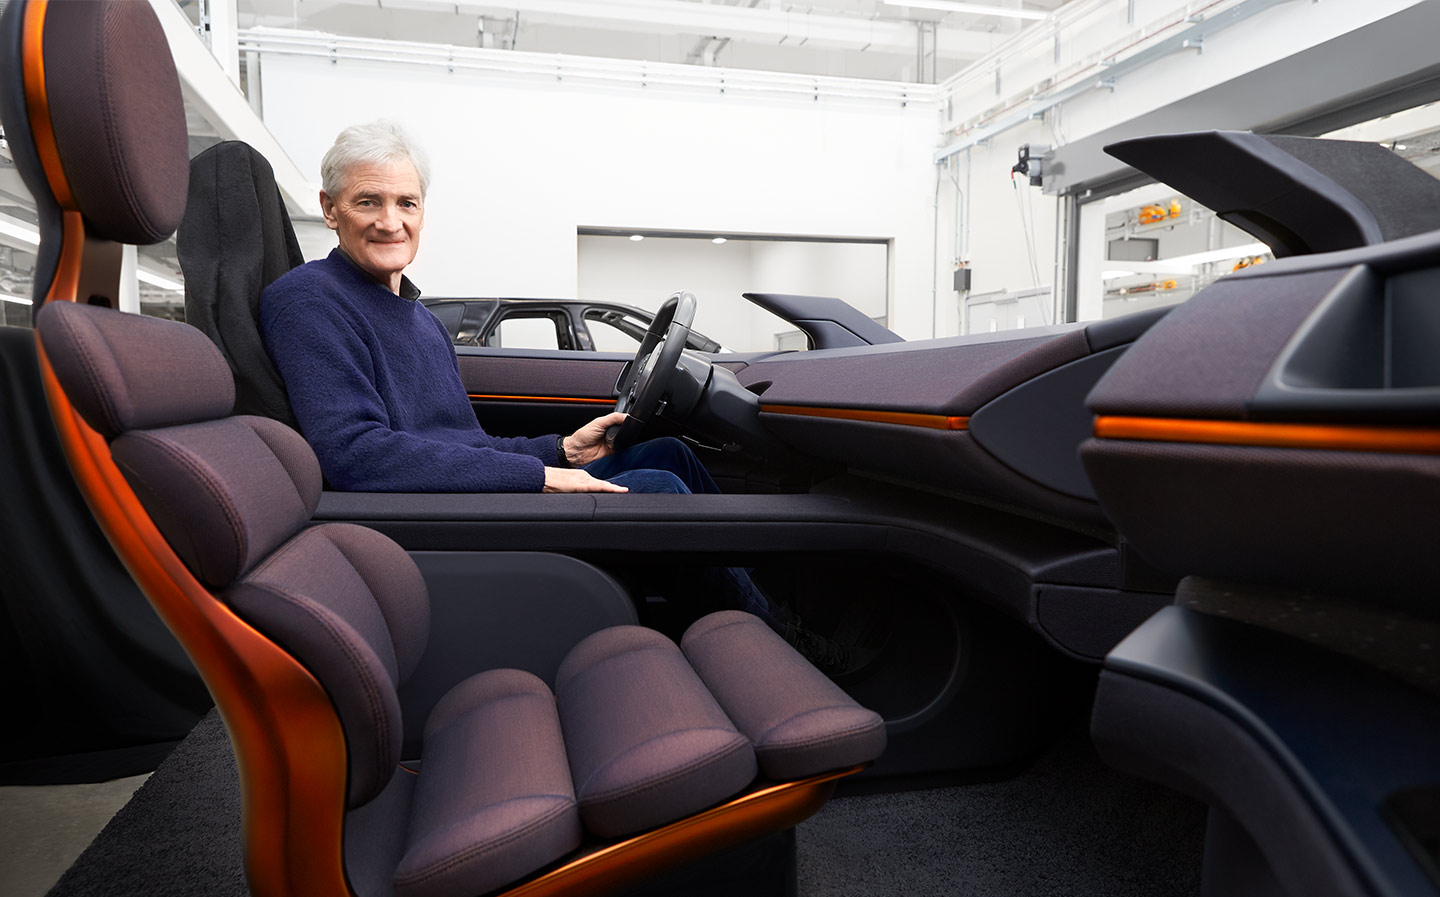 Dyson electric car interior: First proper look at James Dyson's failed electric car as entrepreneur tops Sunday Times Rich List for first time